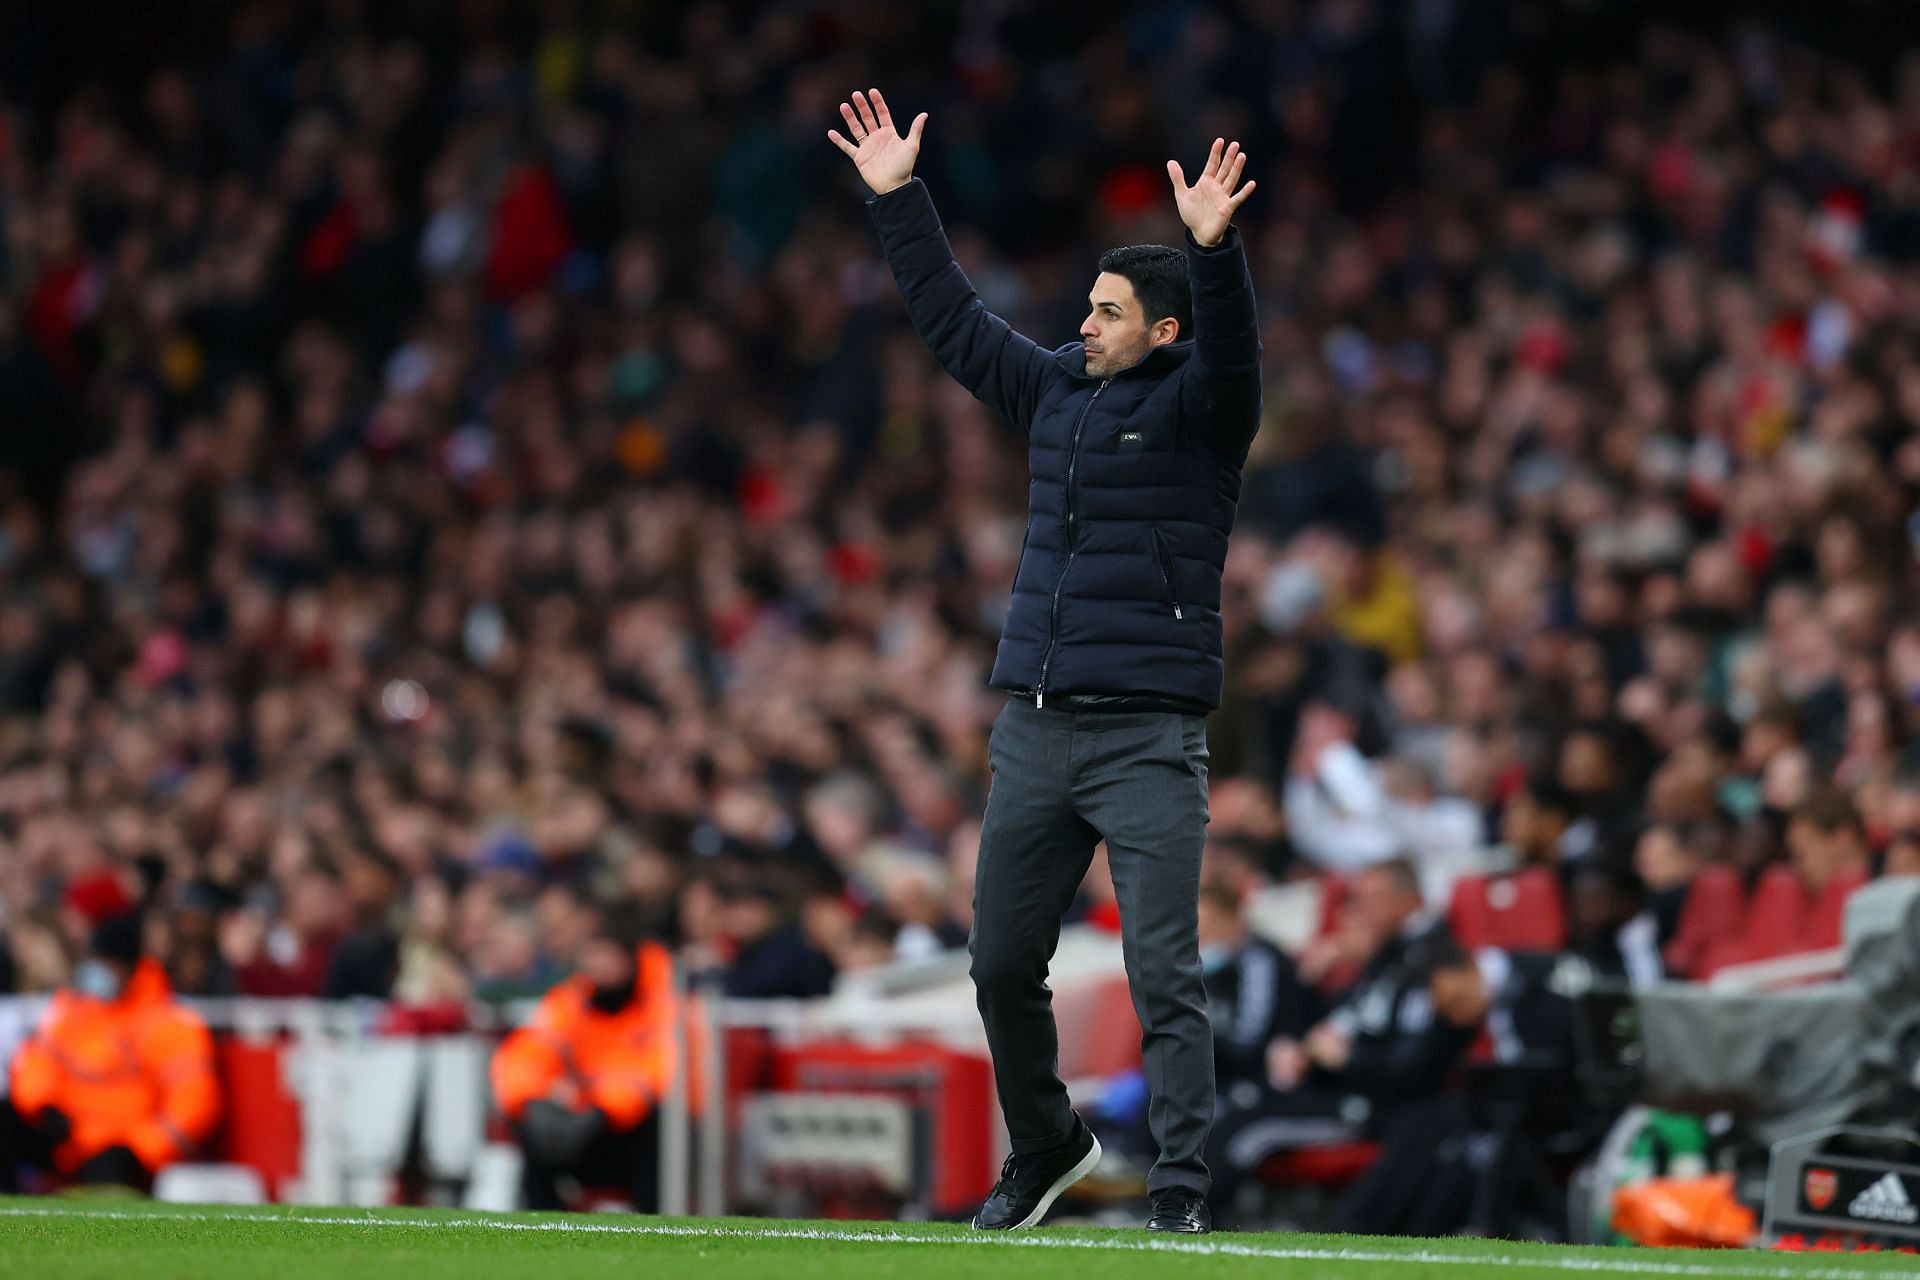 Arsenal manager Mikel Arteta failed to get the better of Tottenham Hotspur.